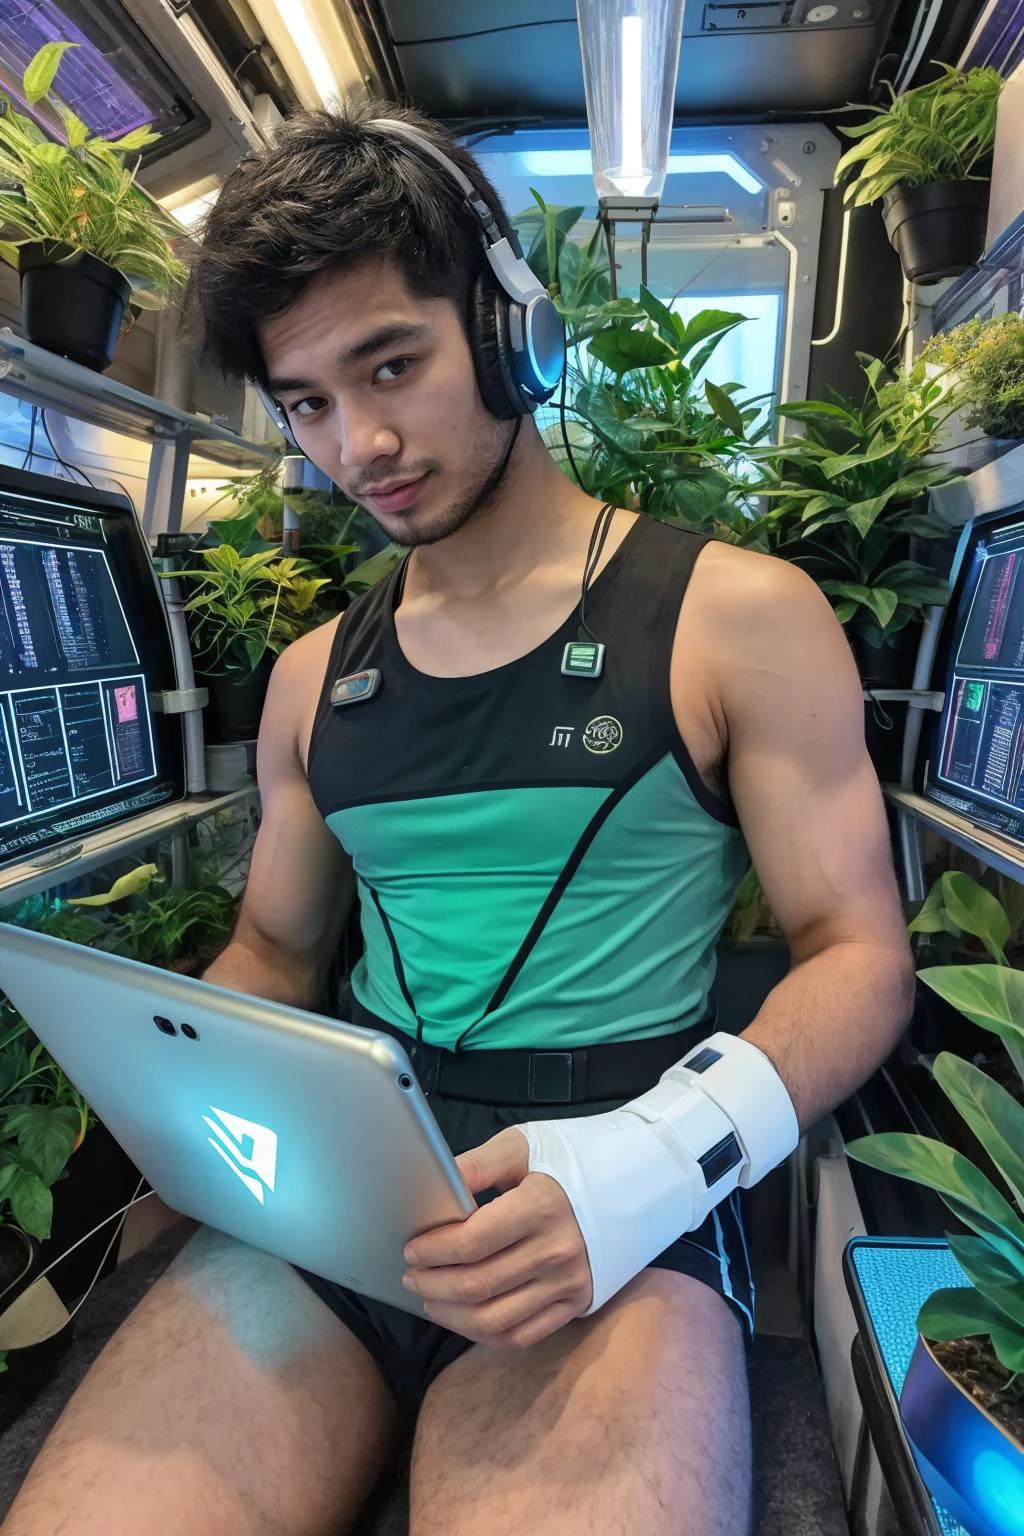 25 year old scruffy lanky Thai man using a tablet, futuristic, (body hair, (chest hair), black hair), sci-fi, space station interior, hydroponic garden, sci-fi cyberpunk outfit, (tank top), futuristic computer monitors, plants, studying plants, sci-fi headset, muscular, biceps, fingerless gloves,